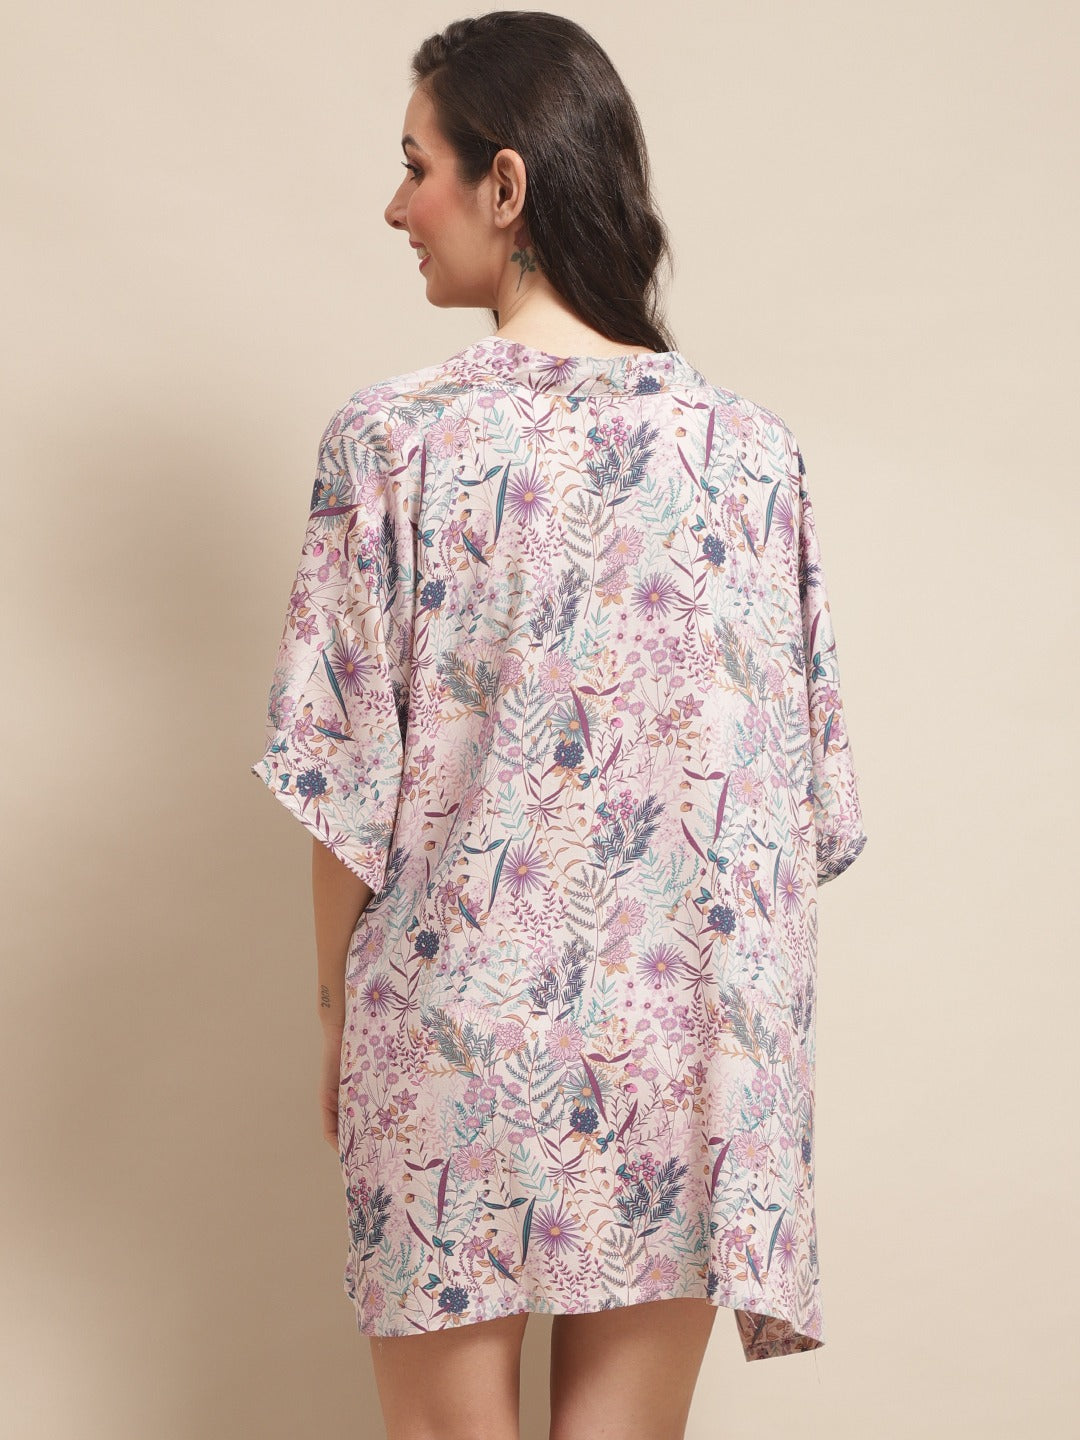 Mauve Color Floral Printed Viscose Rayon 3 pcs Coverup Set With Robe Beachwear  For Woman Claura Designs Pvt. Ltd. Beachwear Beachwear, Beachwear_size, Coverup, Floral, mauve color, Swimwear